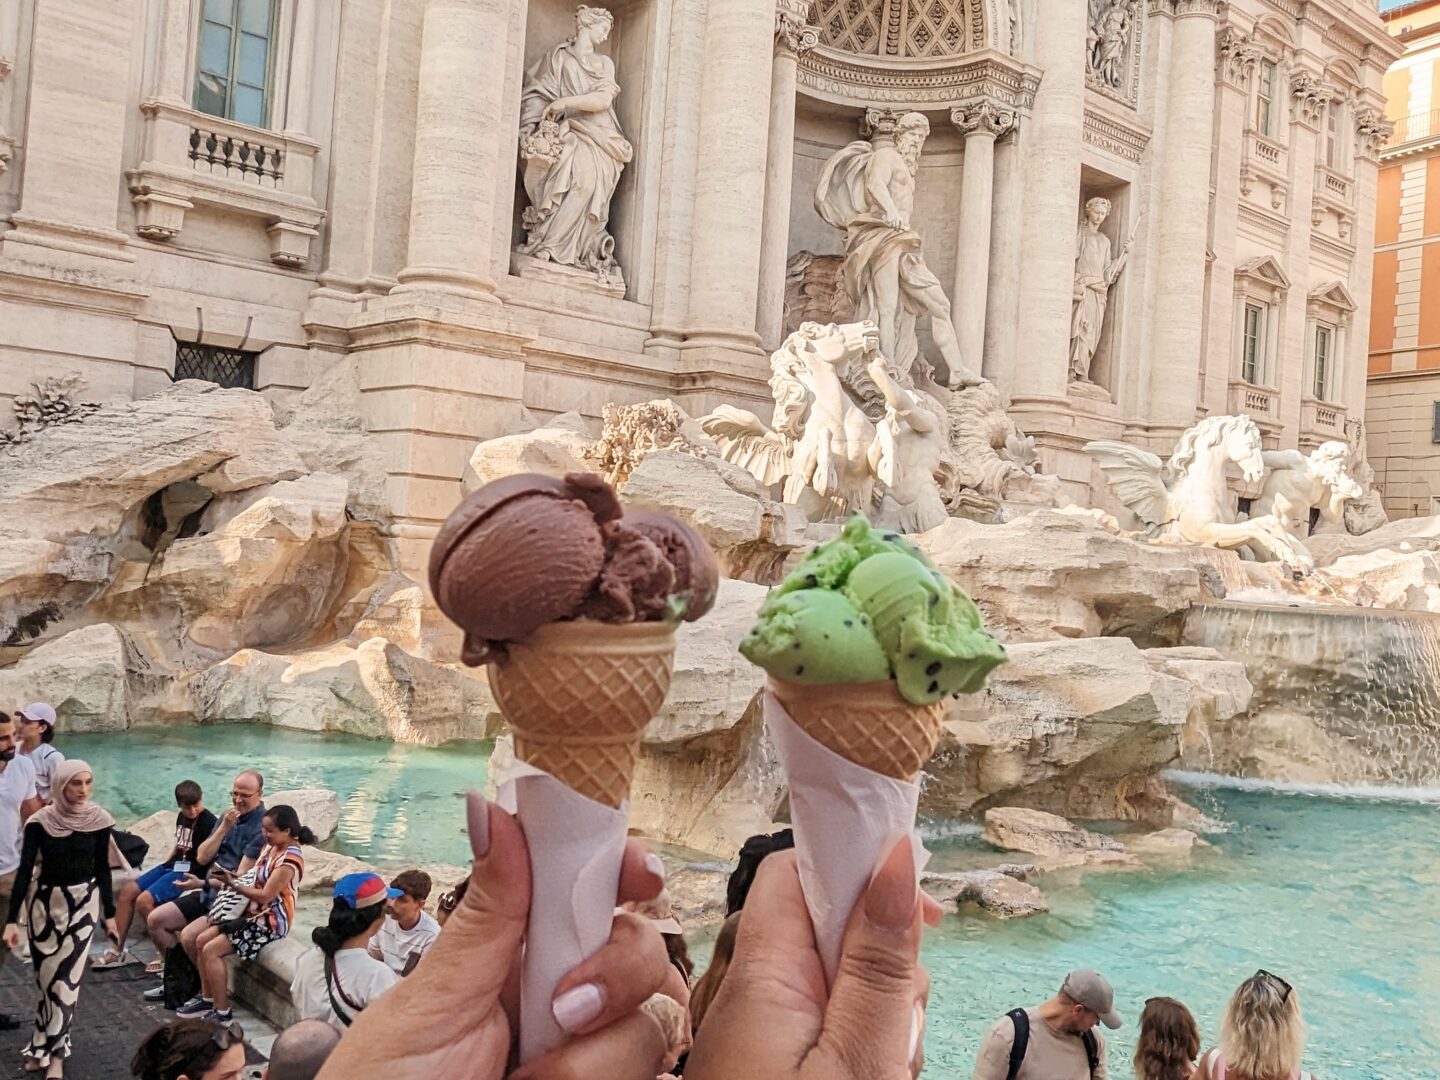 Eating Ice Cream by the Fontana Trevi